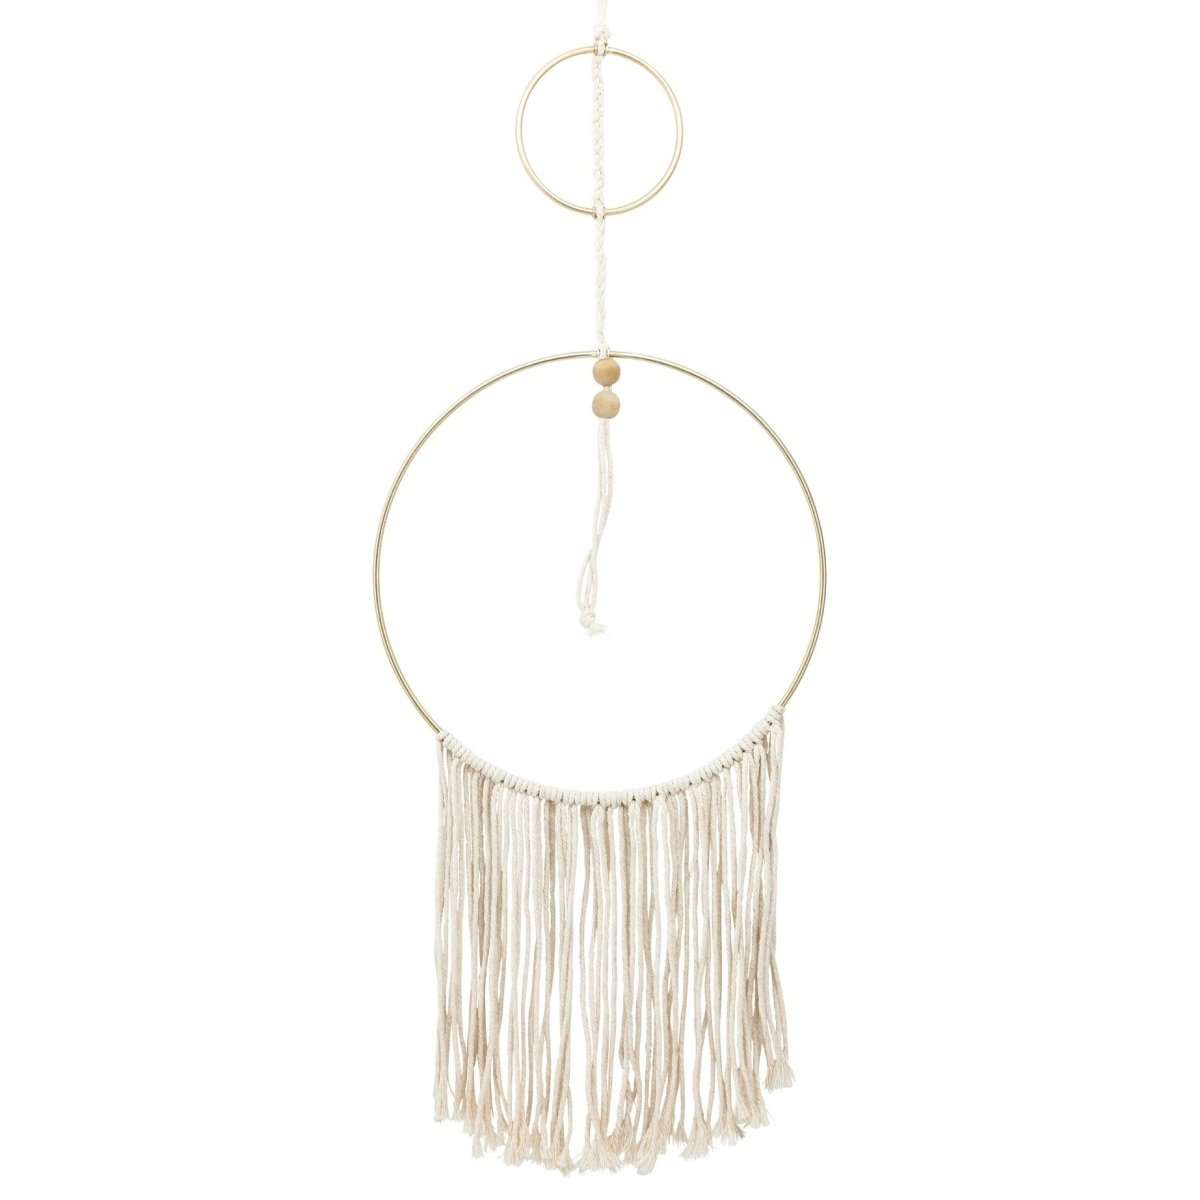 Sagebrook Home Curvy Metal Hanging Wall Accent with Tassels, Natural, 30"H - lily & onyx